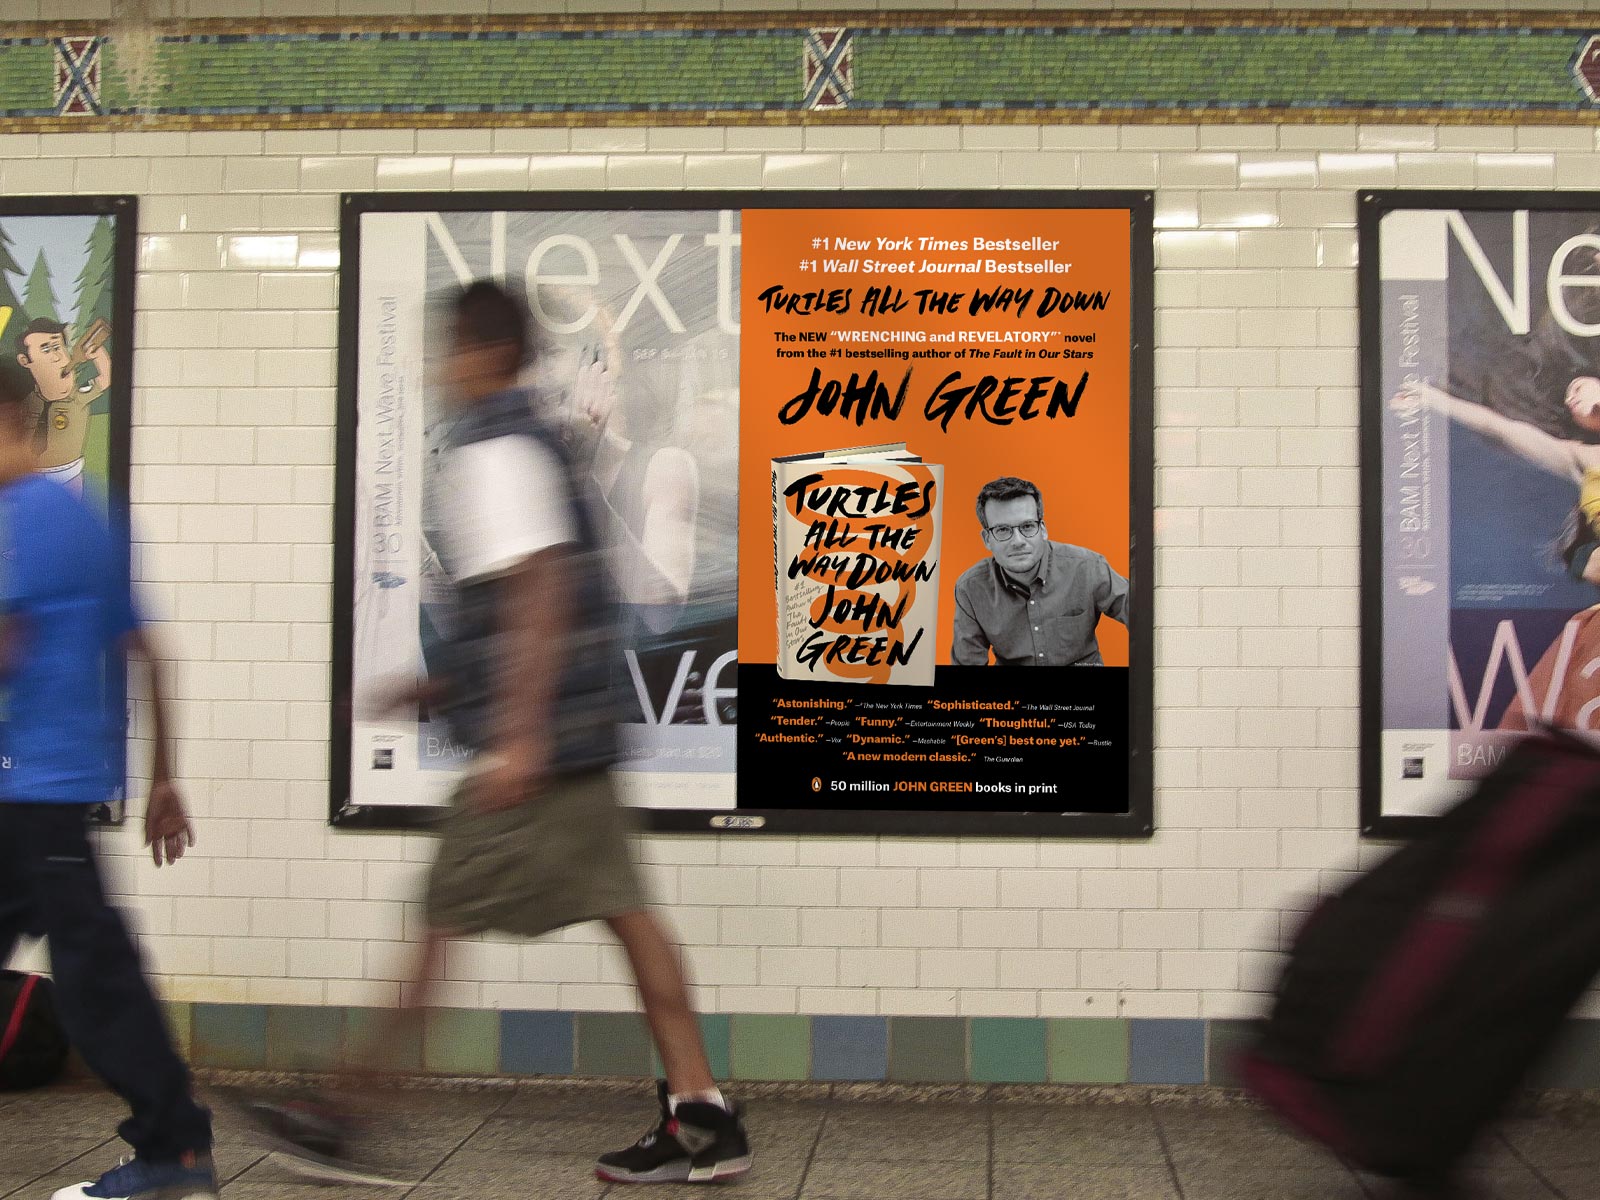 Turtles All the Way Down - John Green - MTA posters, NYC